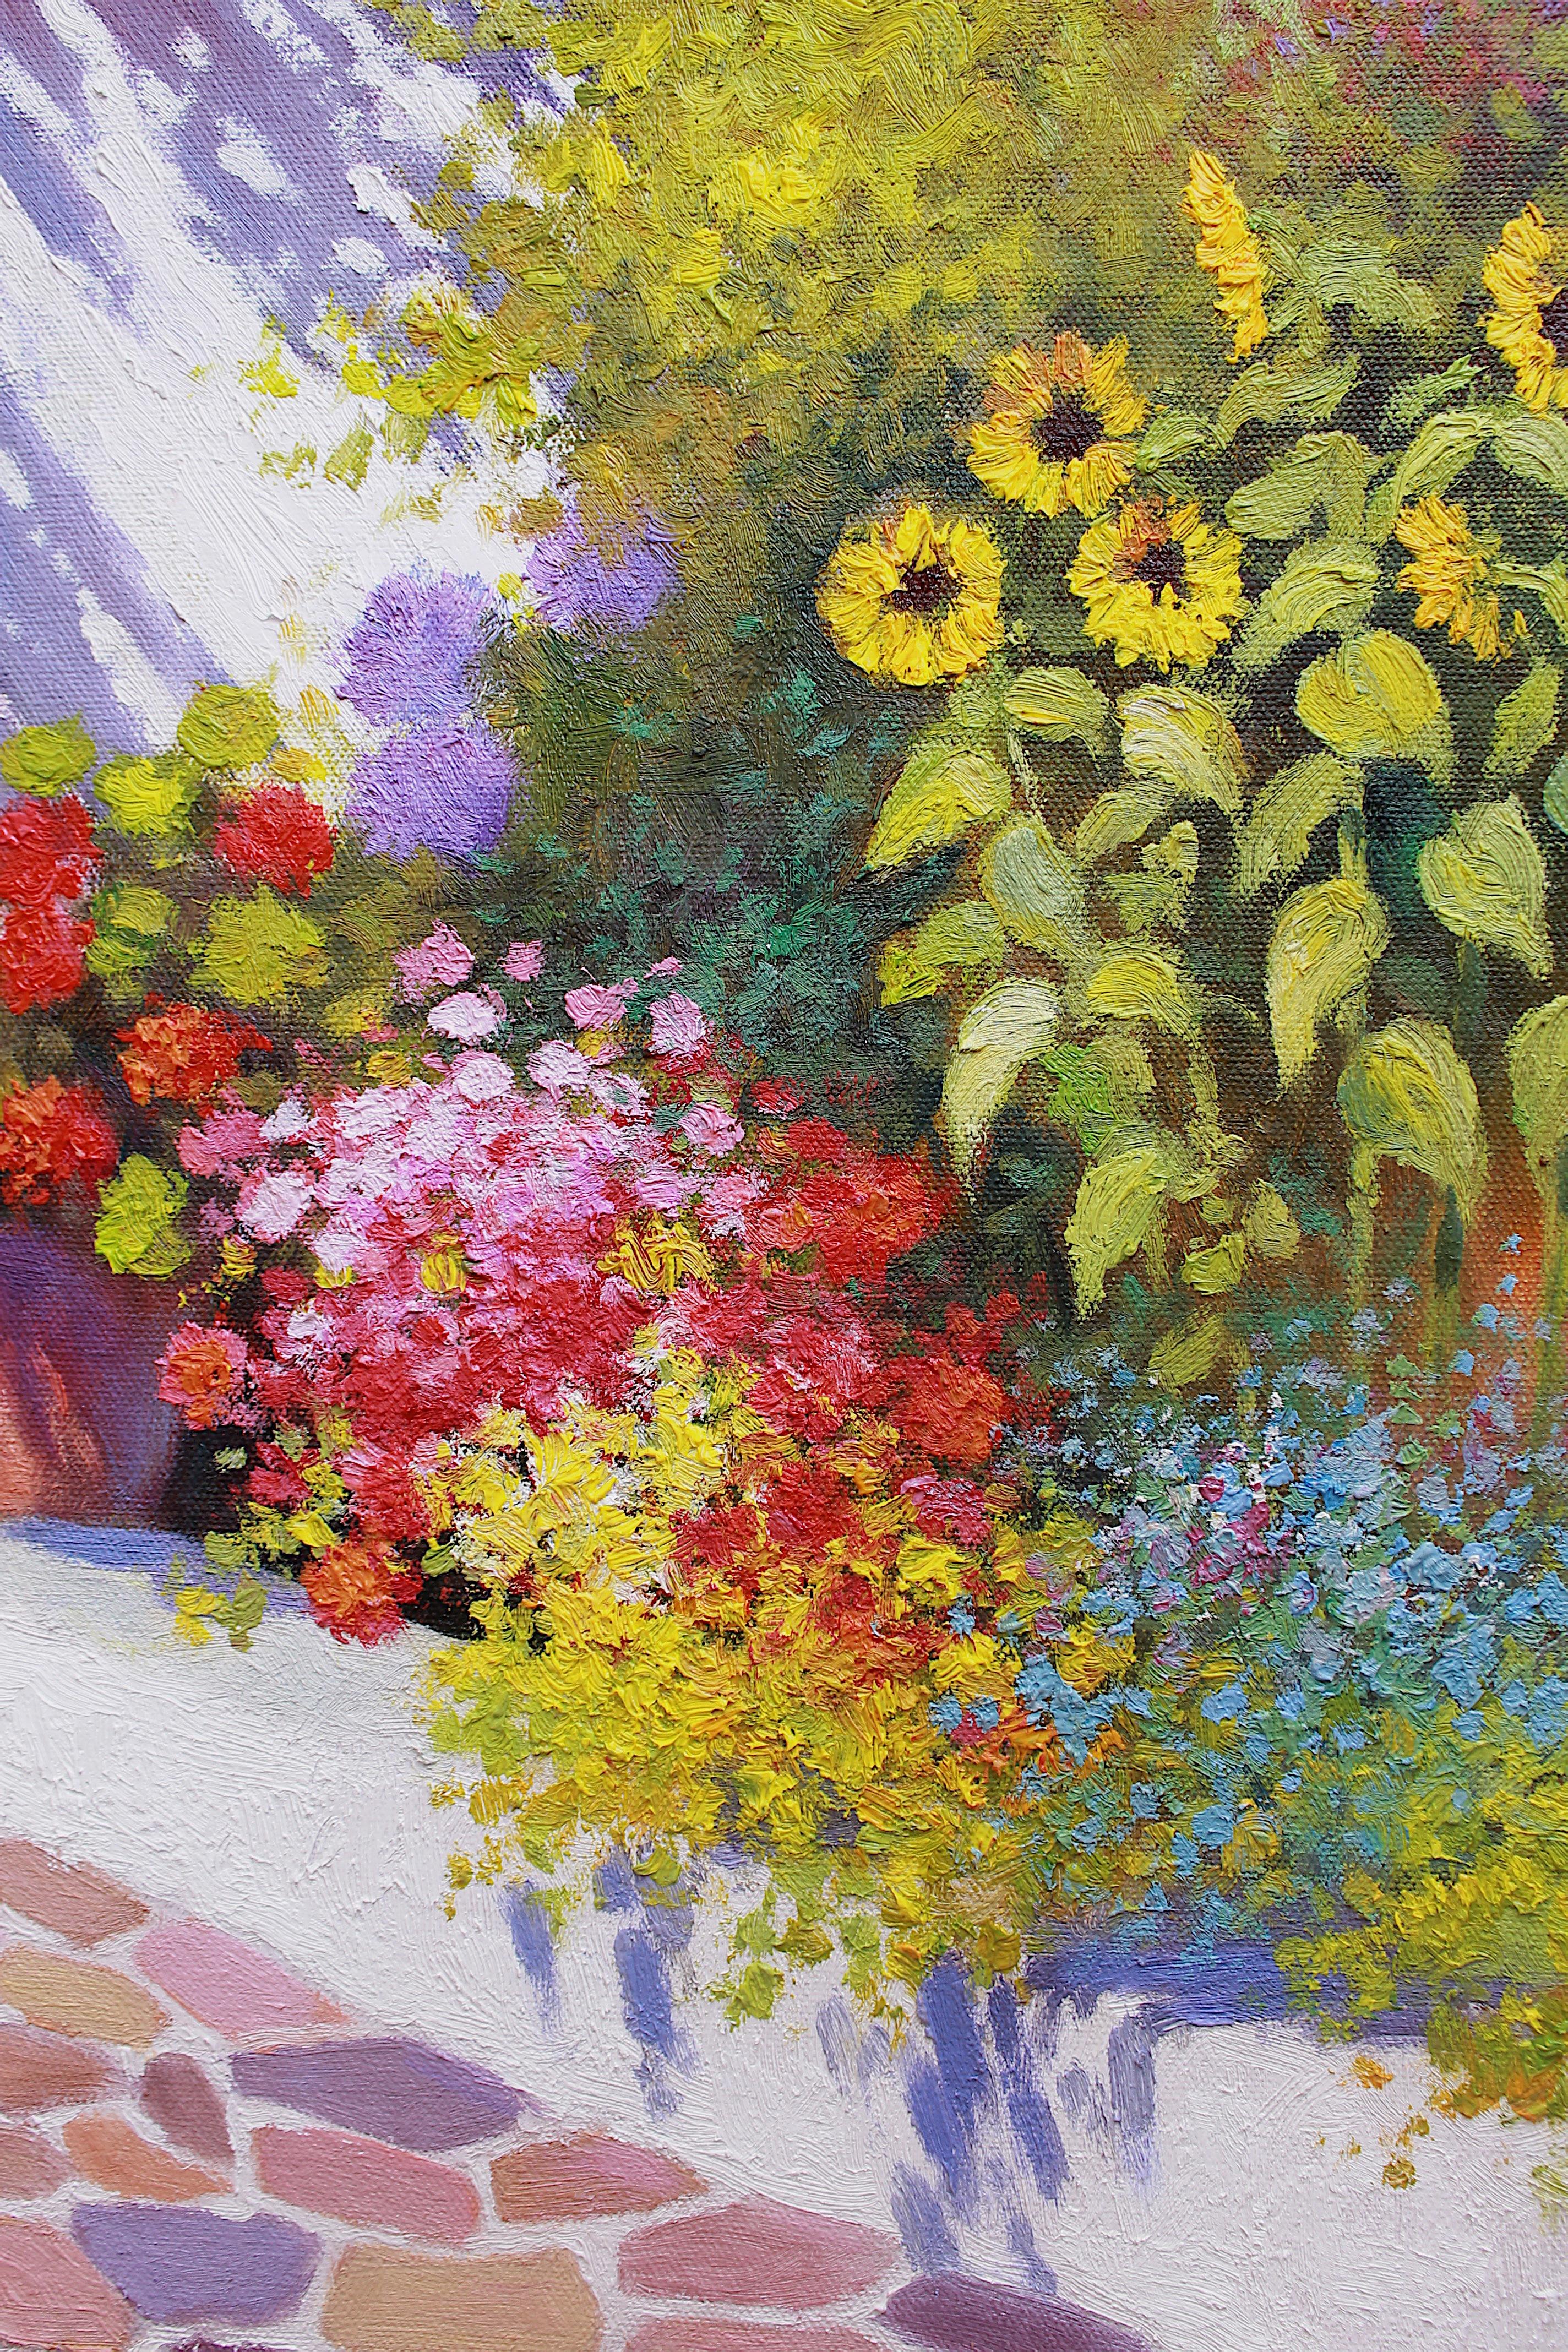 Floral Pathway - Original oil painting - Impressionist - Painting by Sonco Carrasco